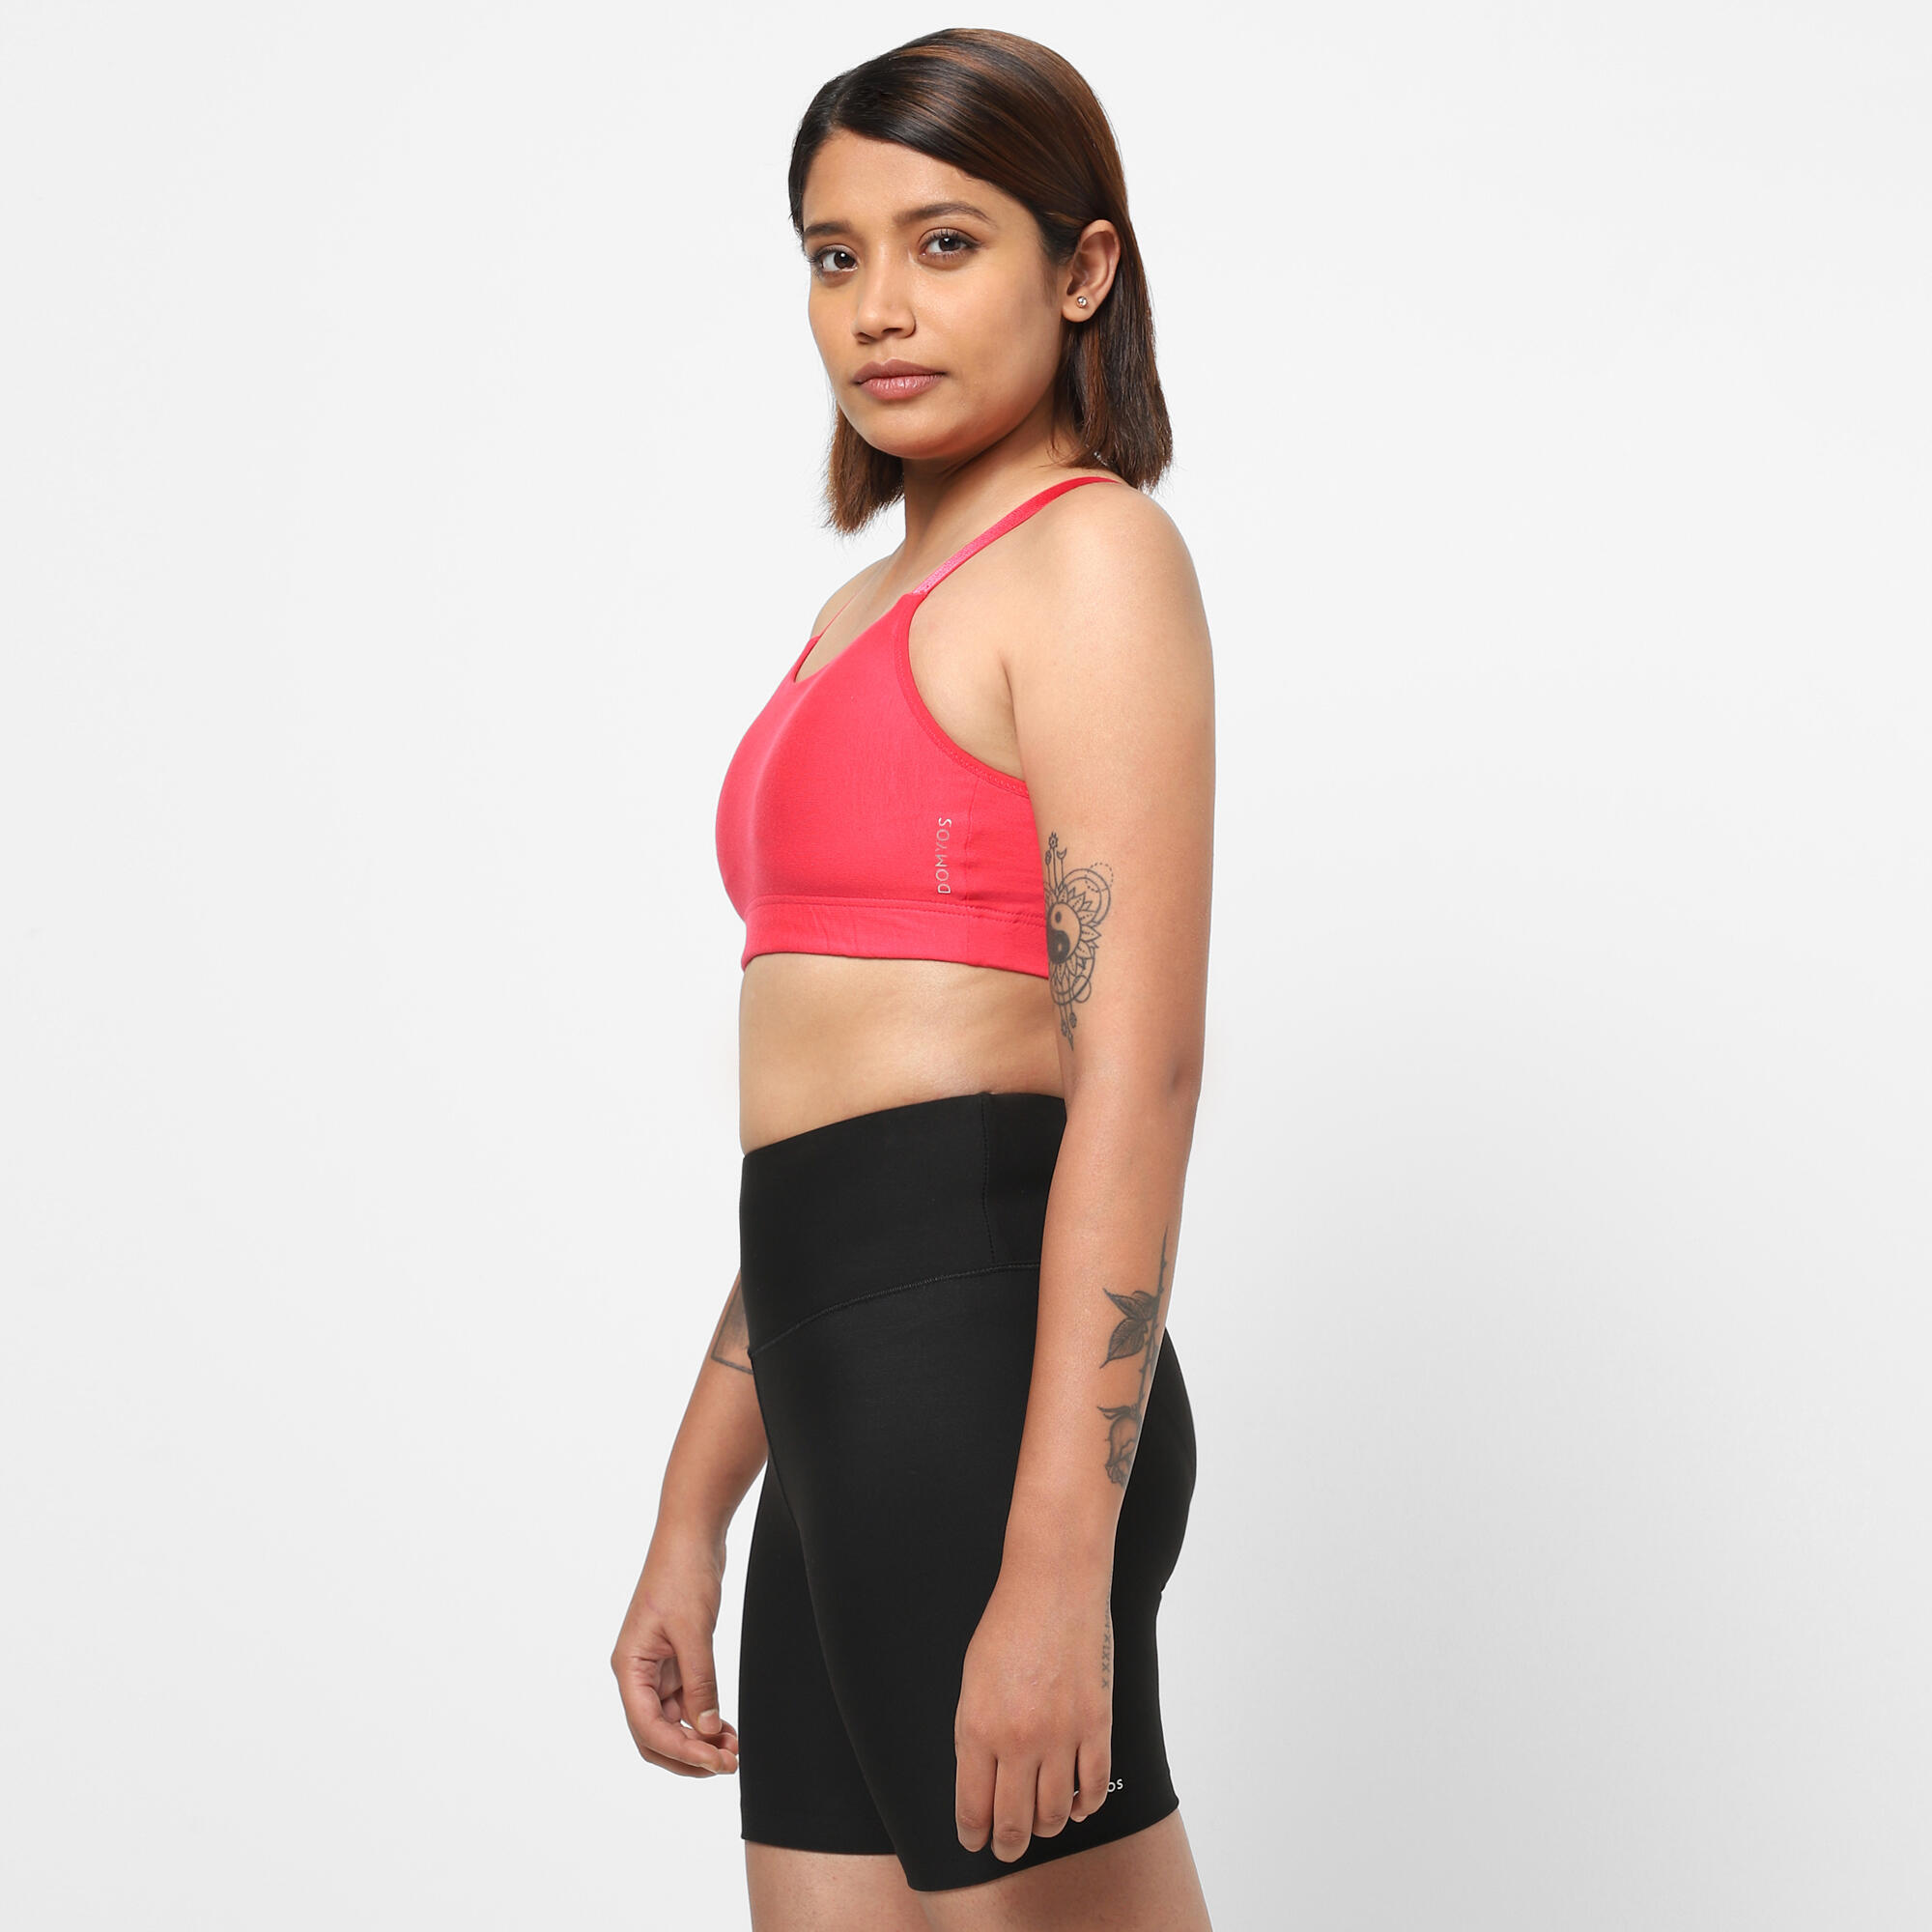 Buy THE COOL FIT PINK SPORTS BRA for Women Online in India